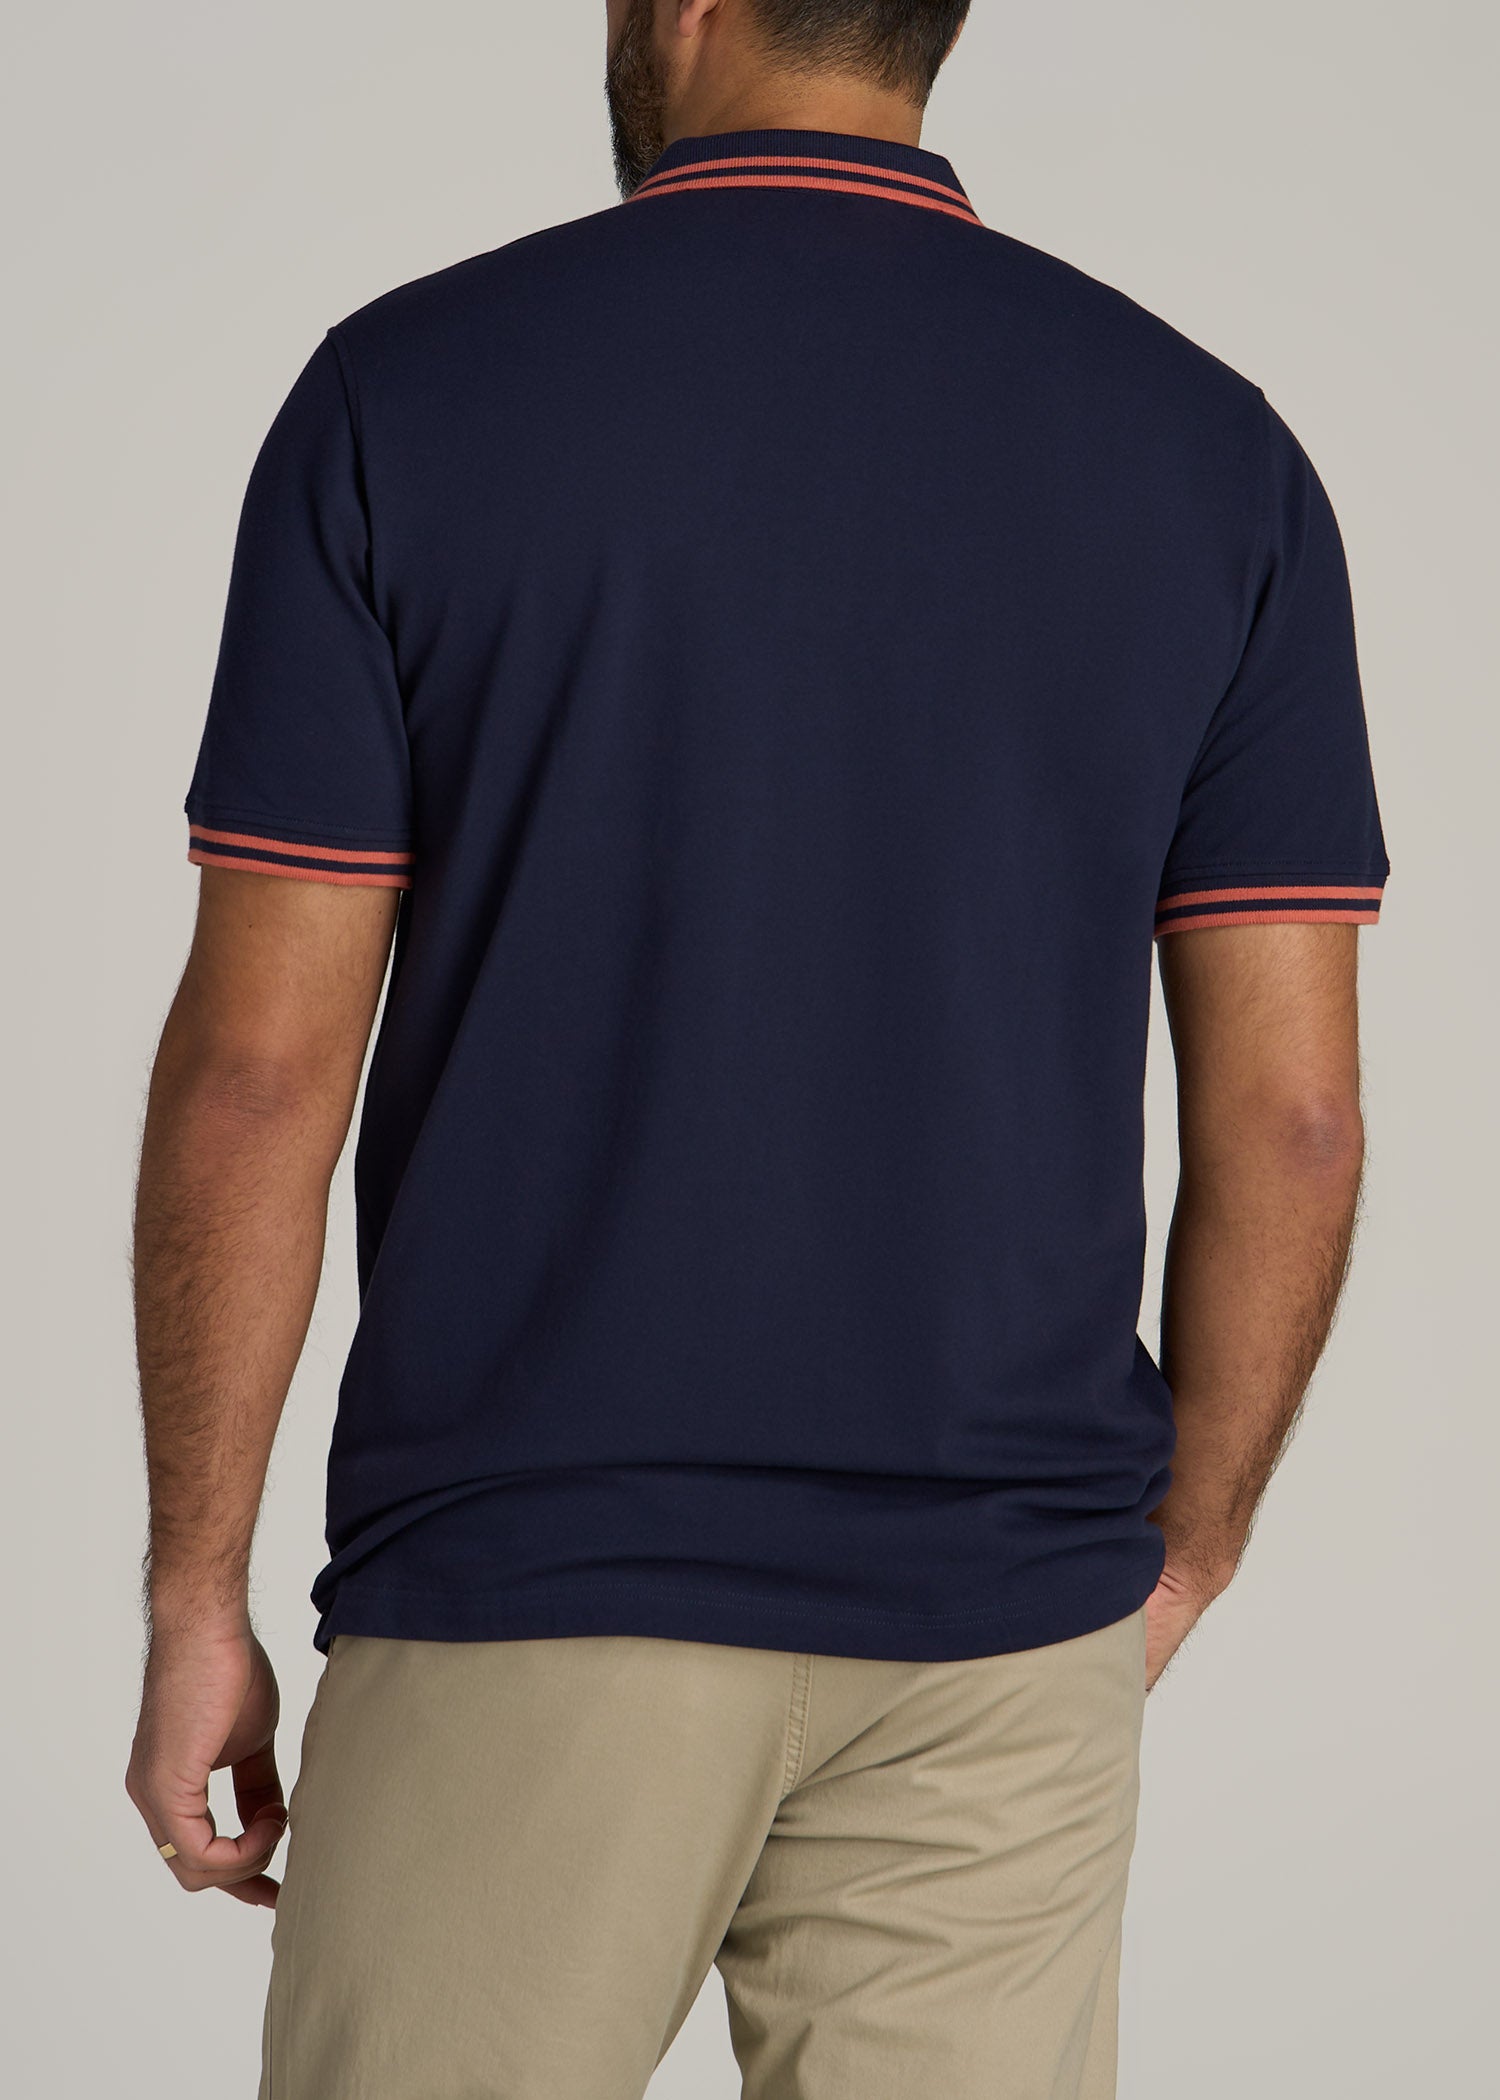 Contrast Tipped Tall Men's Polo Shirt | American Tall